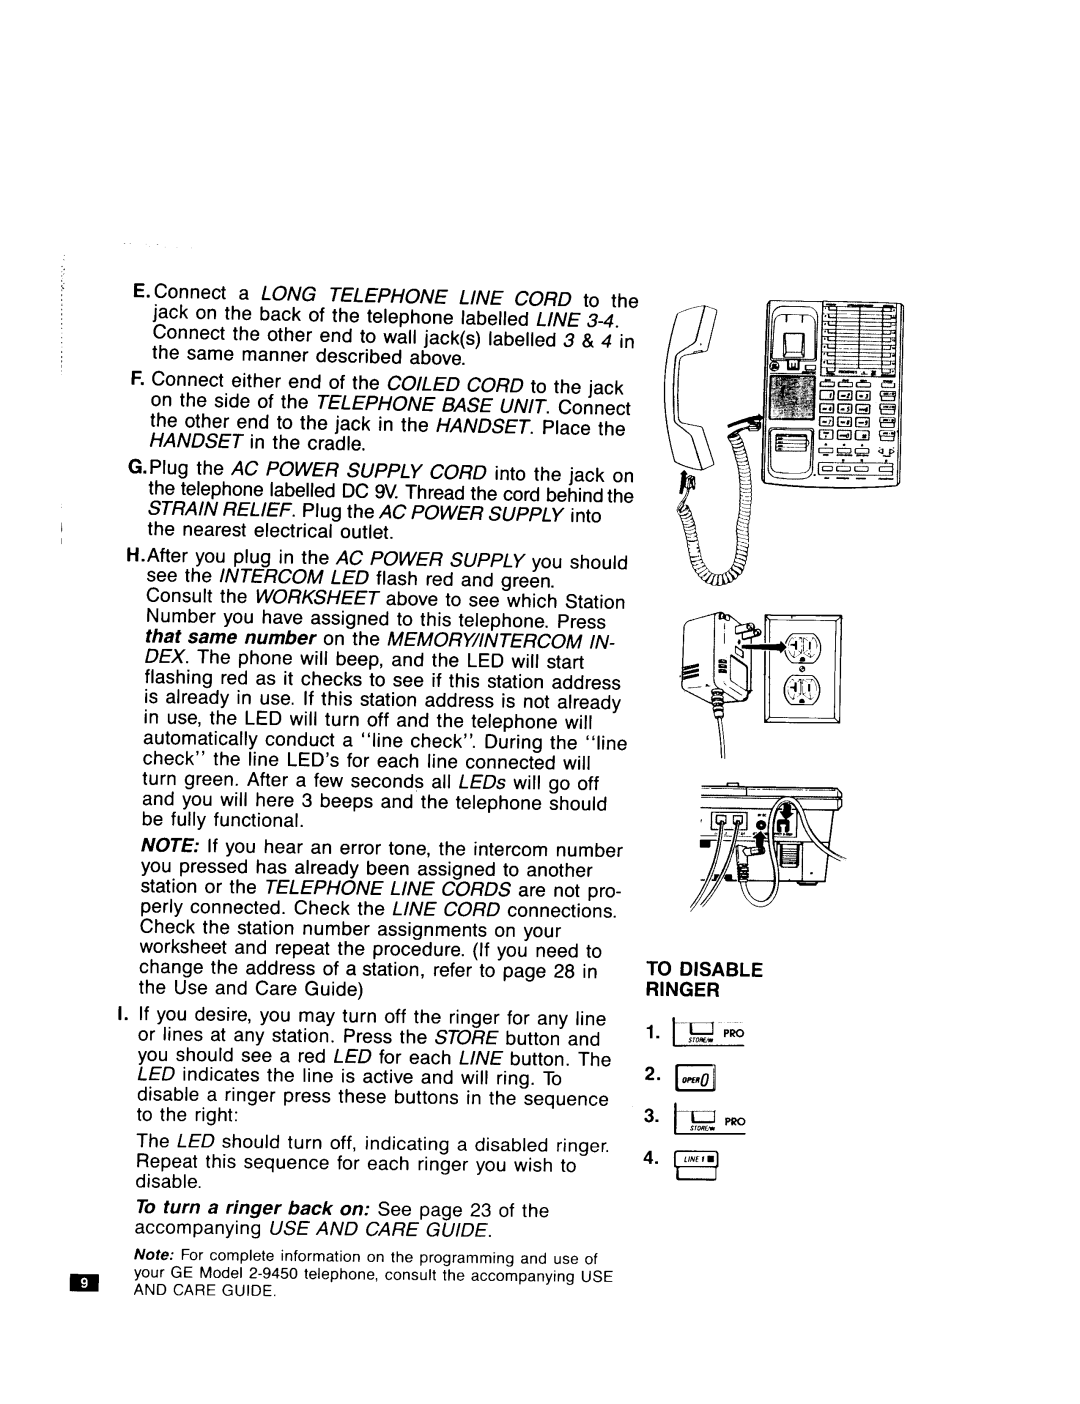 GE Feb-50 installation instructions E. Connect a LONG TELEPHONE L/NE CORD to the, To Disable Ringer 